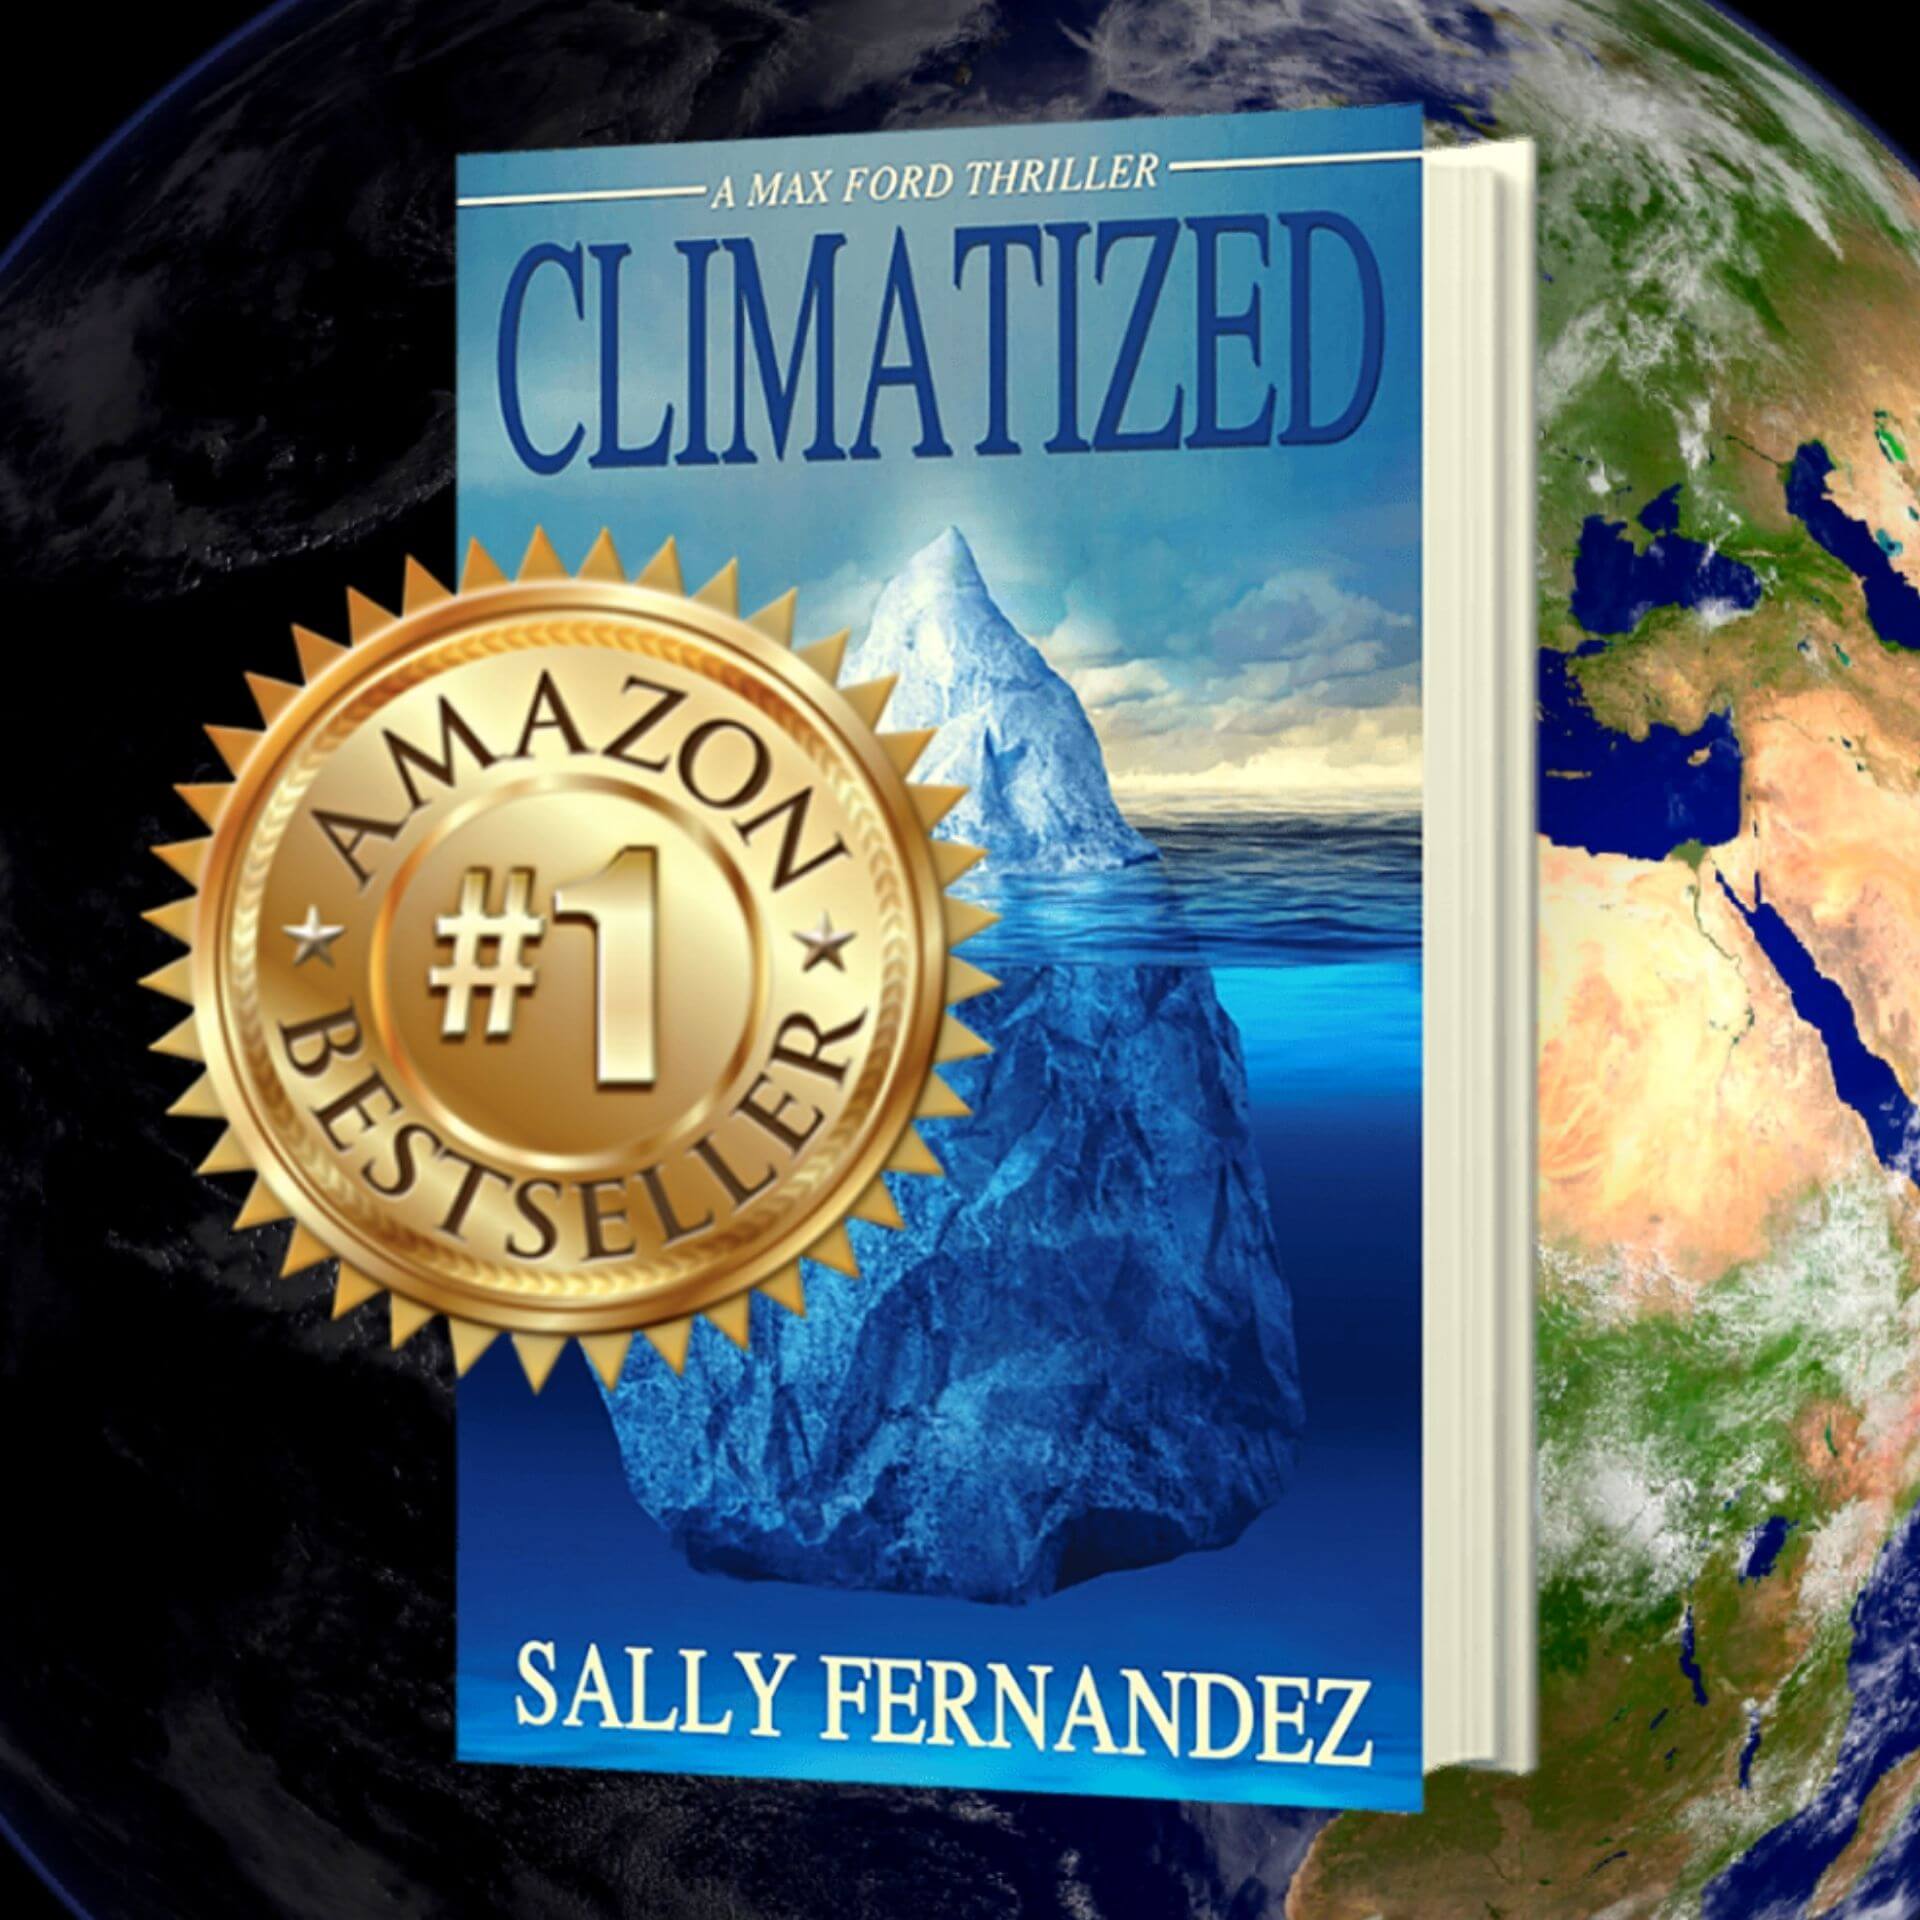 Climate Change Thriller hits #1 on Amazon